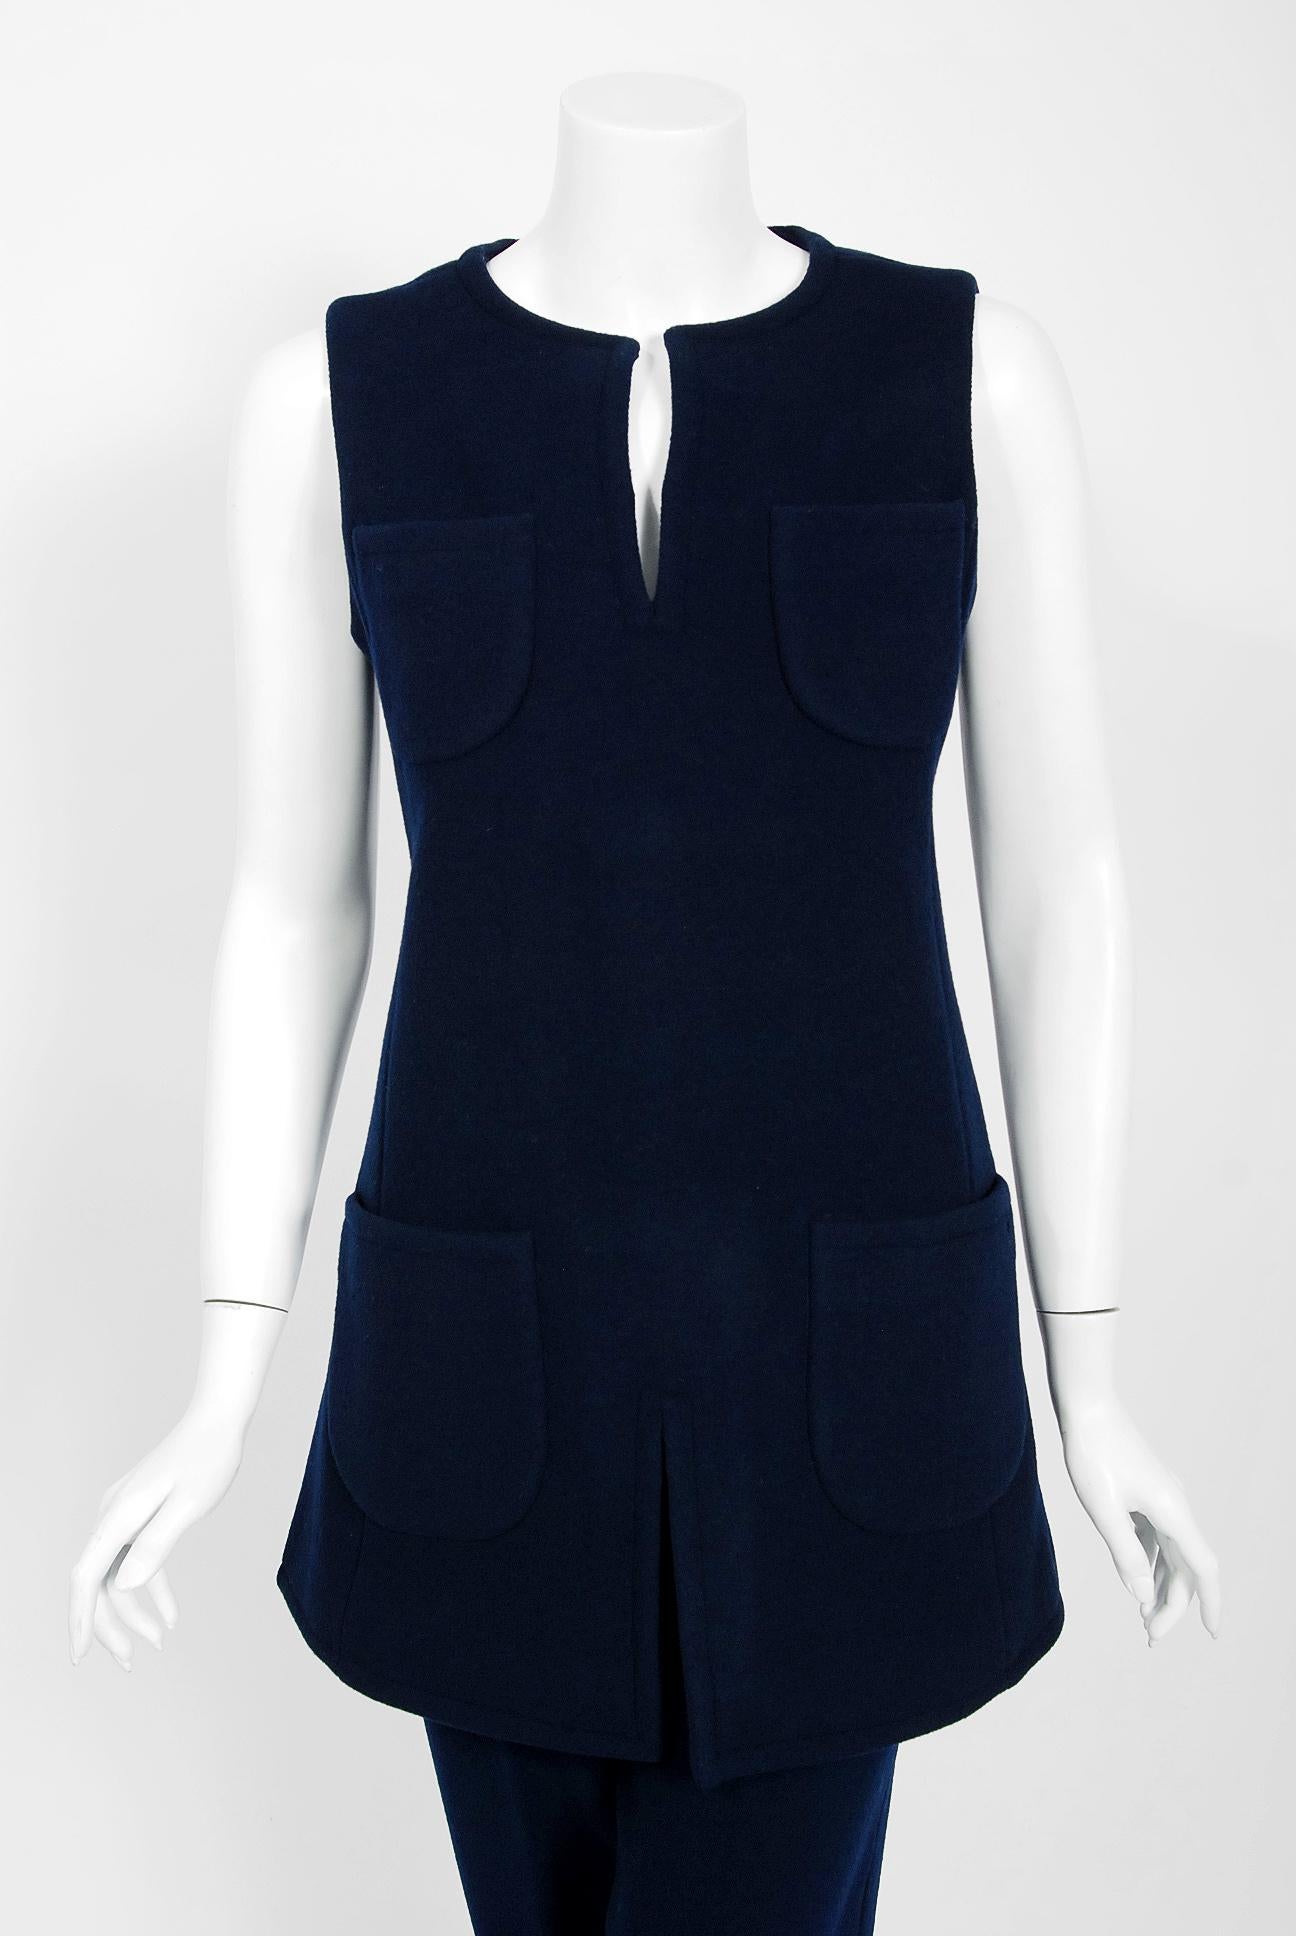 Magnificent Calvin Klein designer navy-blue wool pantsuit from his first 1968 collection! His vision was very influential that by 1975 Vogue was calling his work 